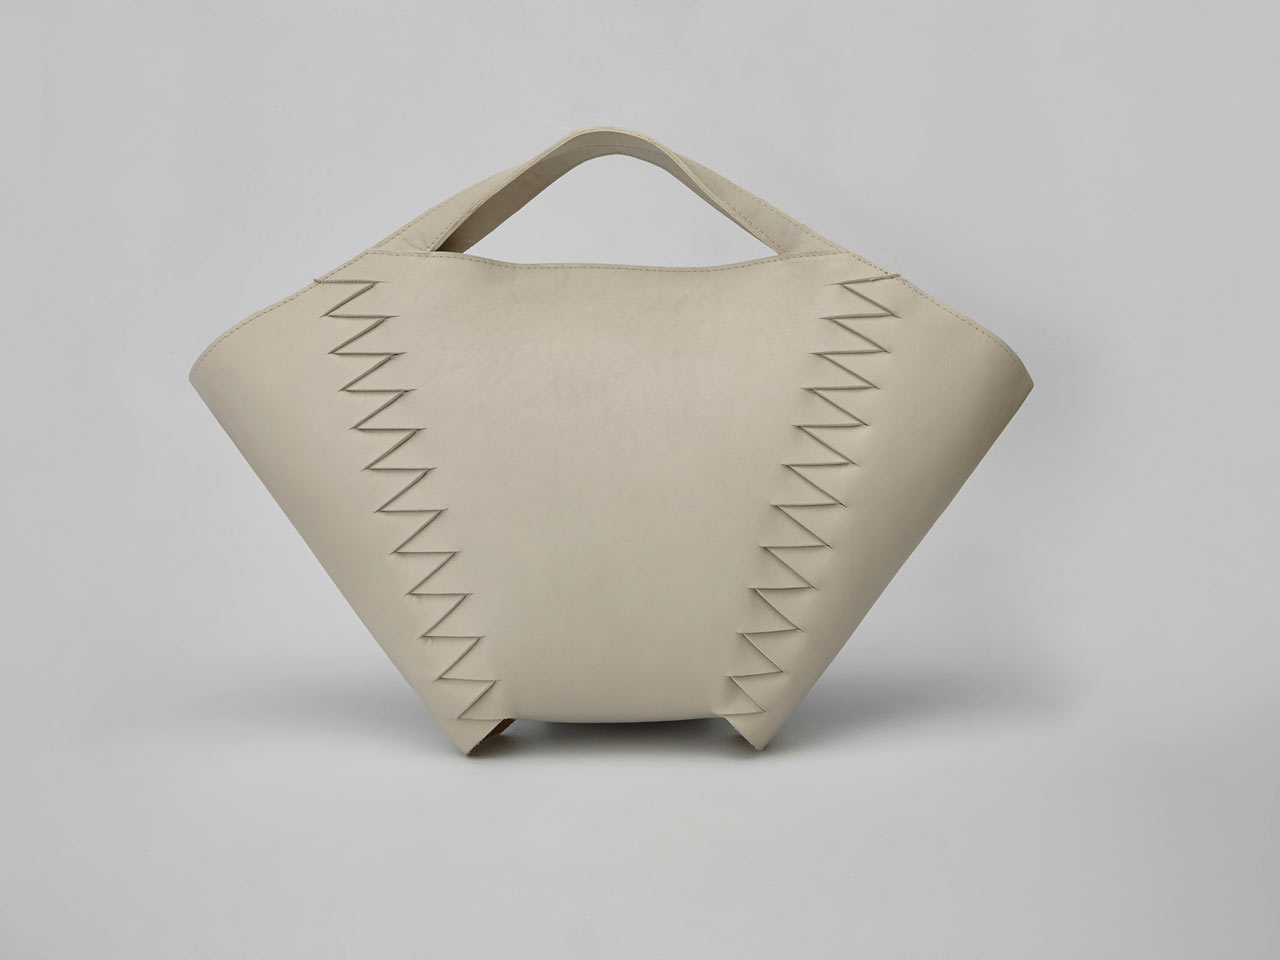 System and Form: Bags Inspired by Hair Braids